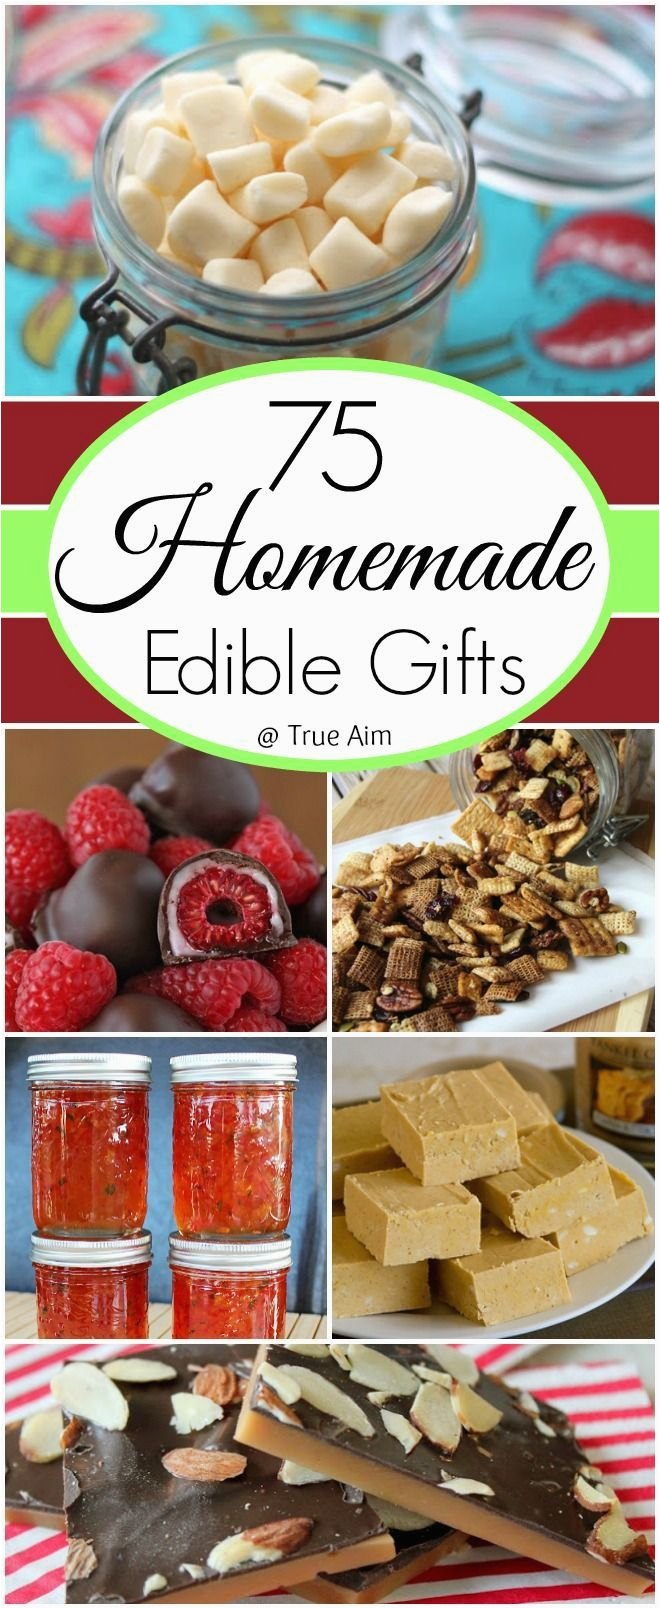 edible gifts for men